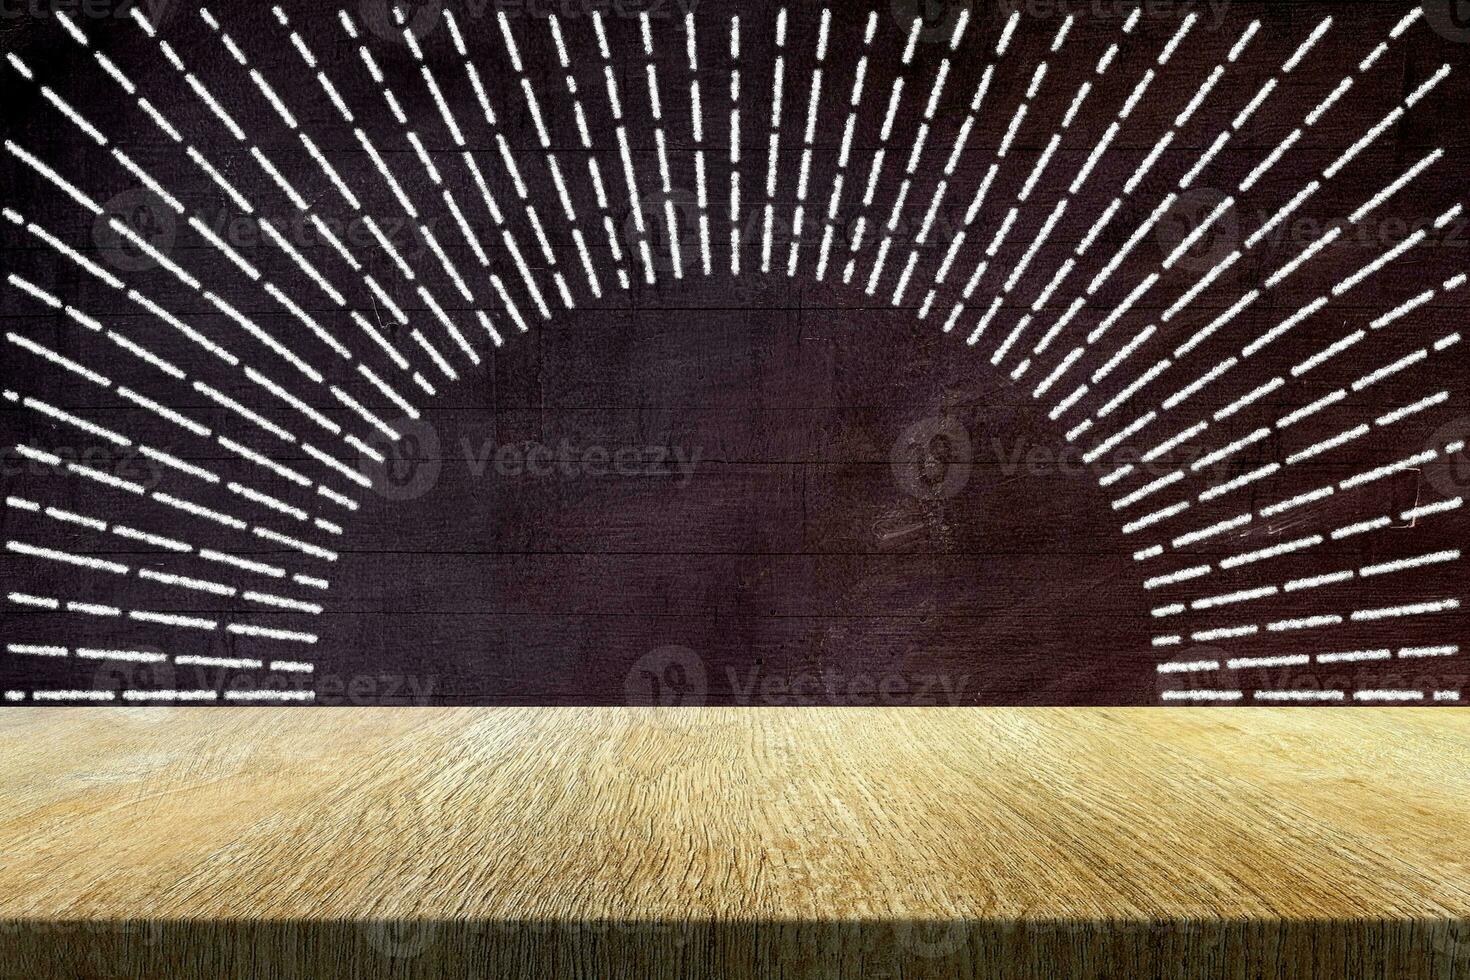 Wood Table with Sunburst in Chalk Drawing Style on Grunge Chalkboard Background, Suitable for Product Presentation Backdrop, Display, and Mock up in Wine Concept. photo